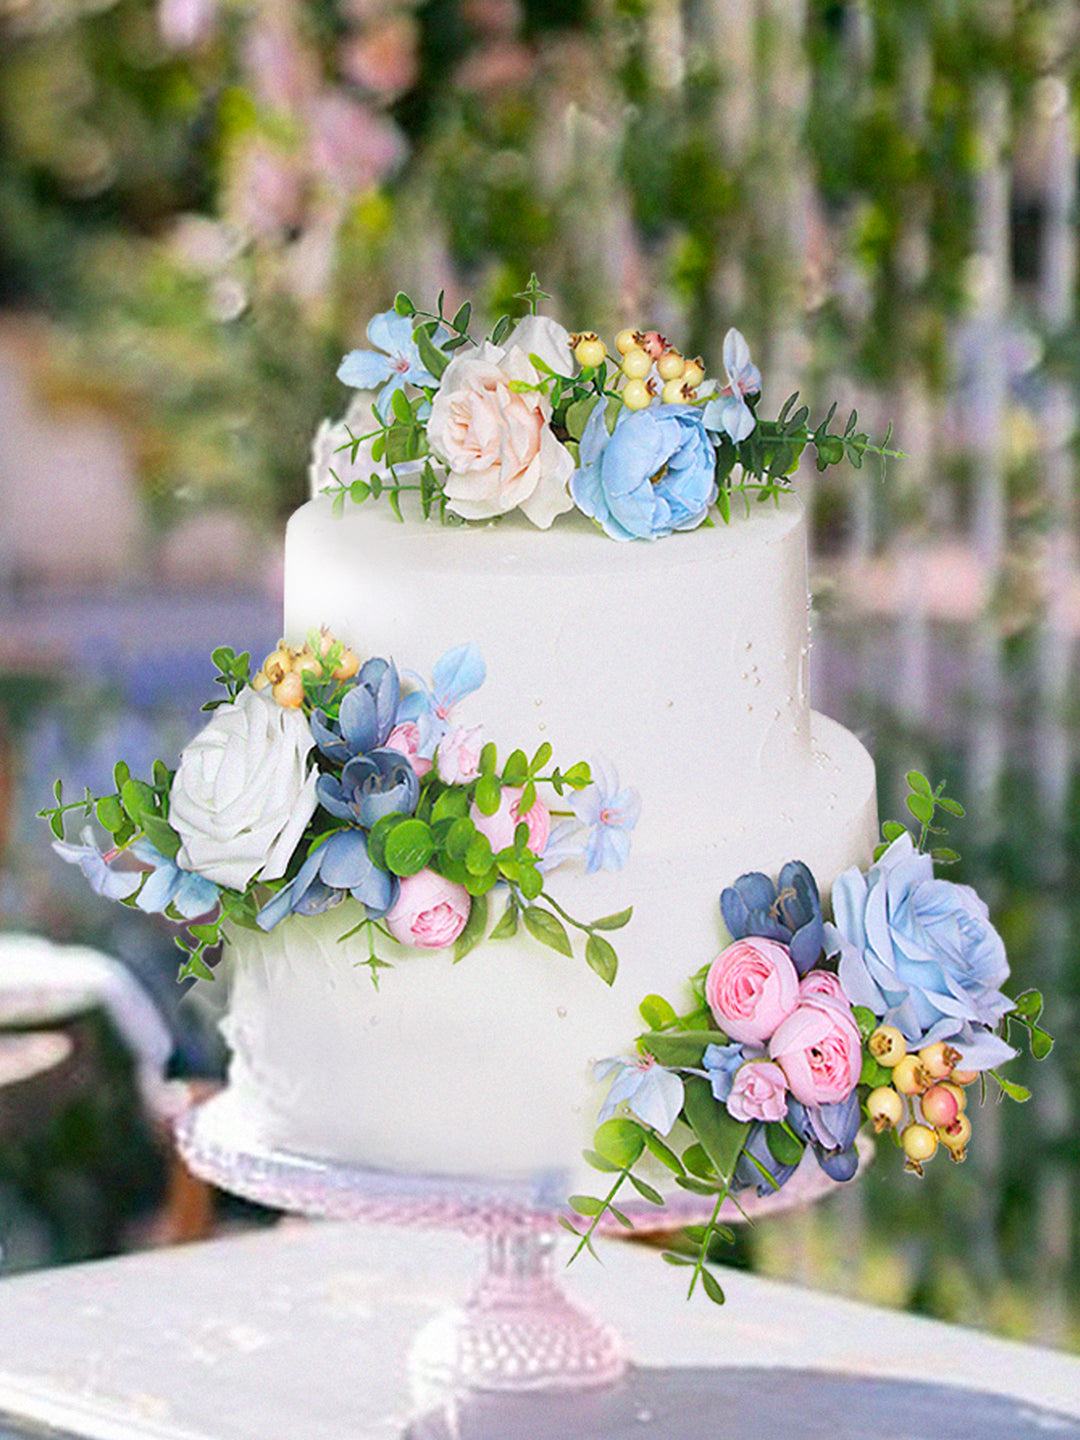 Are Artificial Cake Decorating Flowers Safe? Unveiling the Truth: Safety and Use